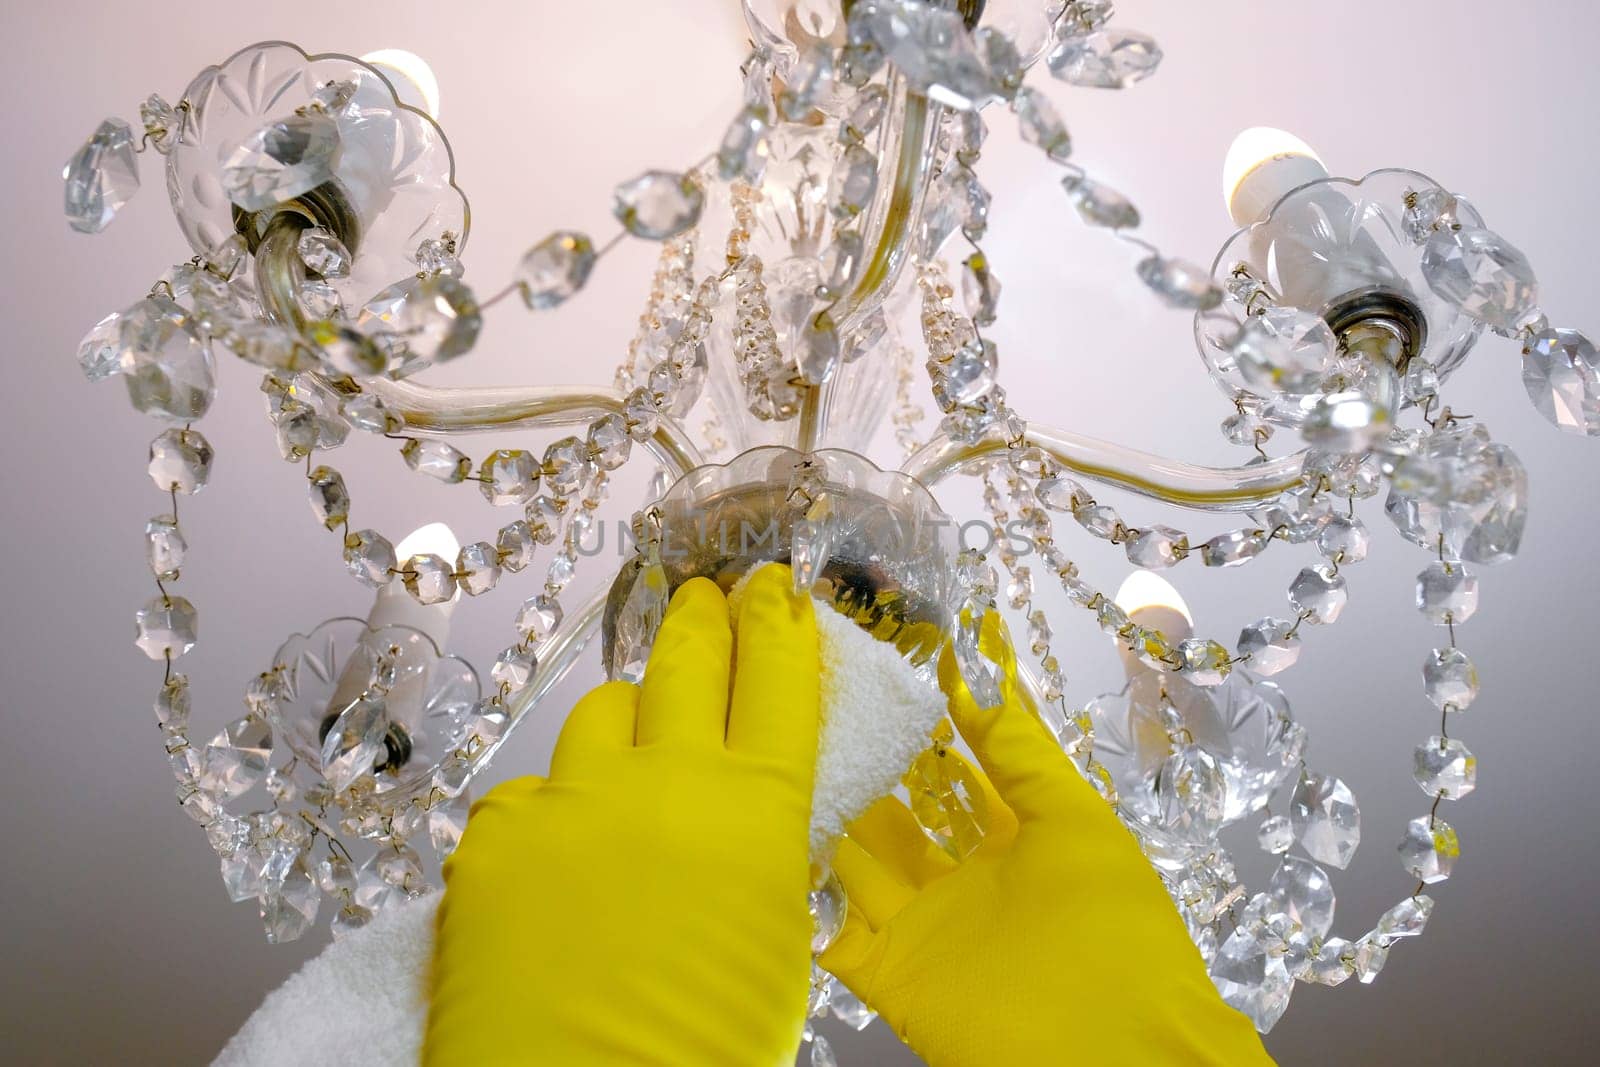 Close-up of gloved hands wipes dust from the chandelier. House cleaning by Shablovskyistock